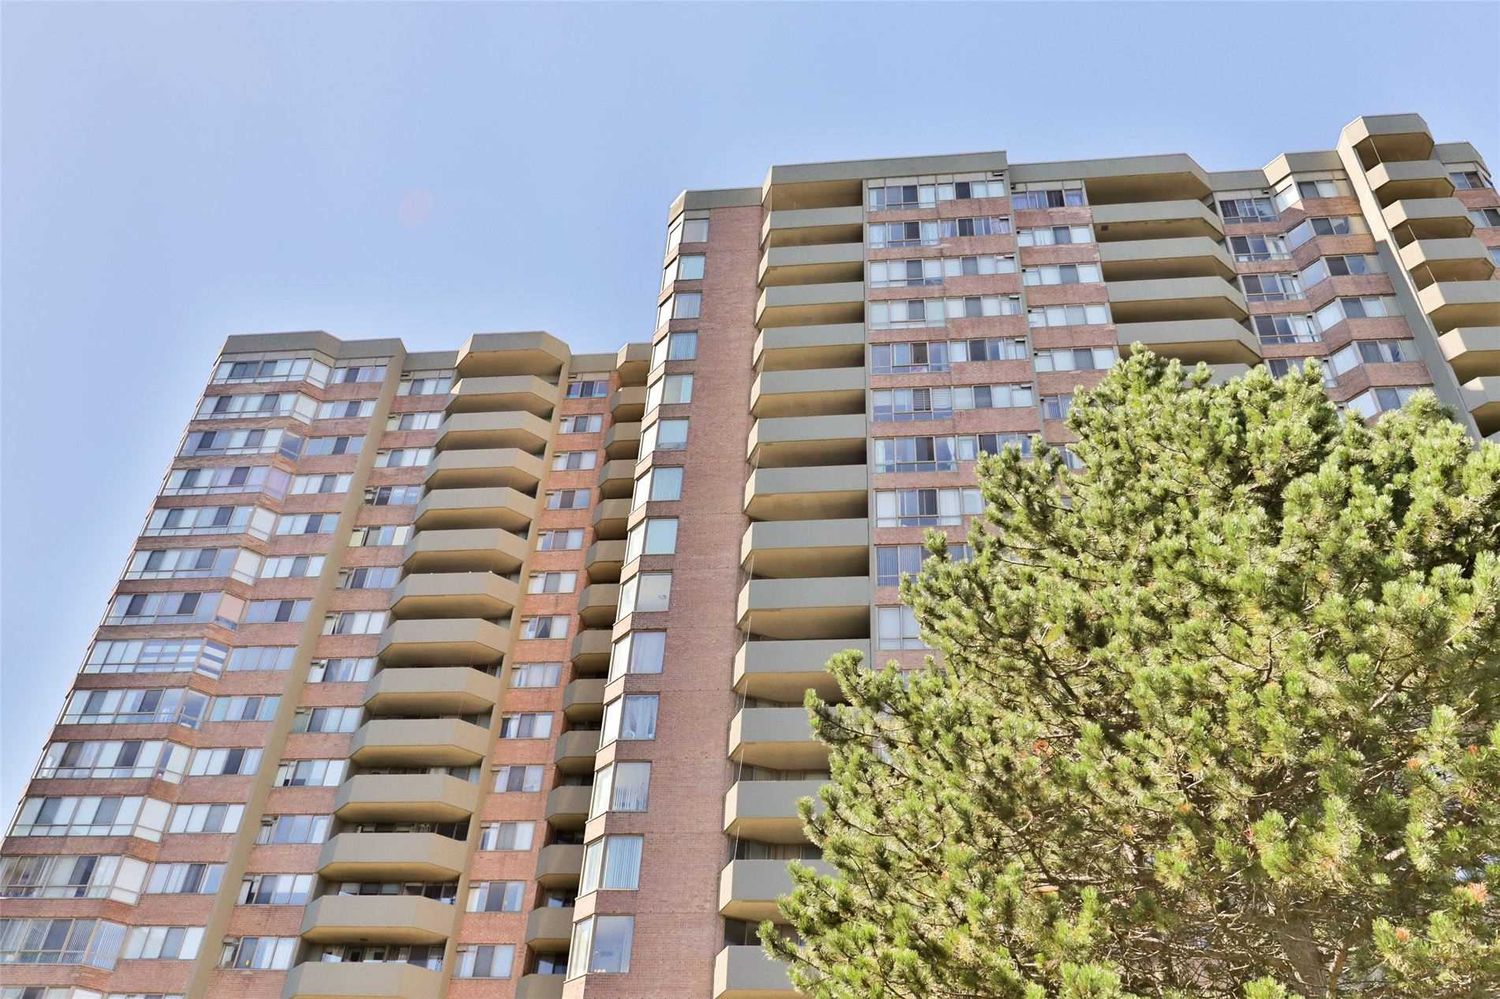 30 Thunder Grove. Wedgewood Grove Condos is located in  Scarborough, Toronto - image #3 of 3